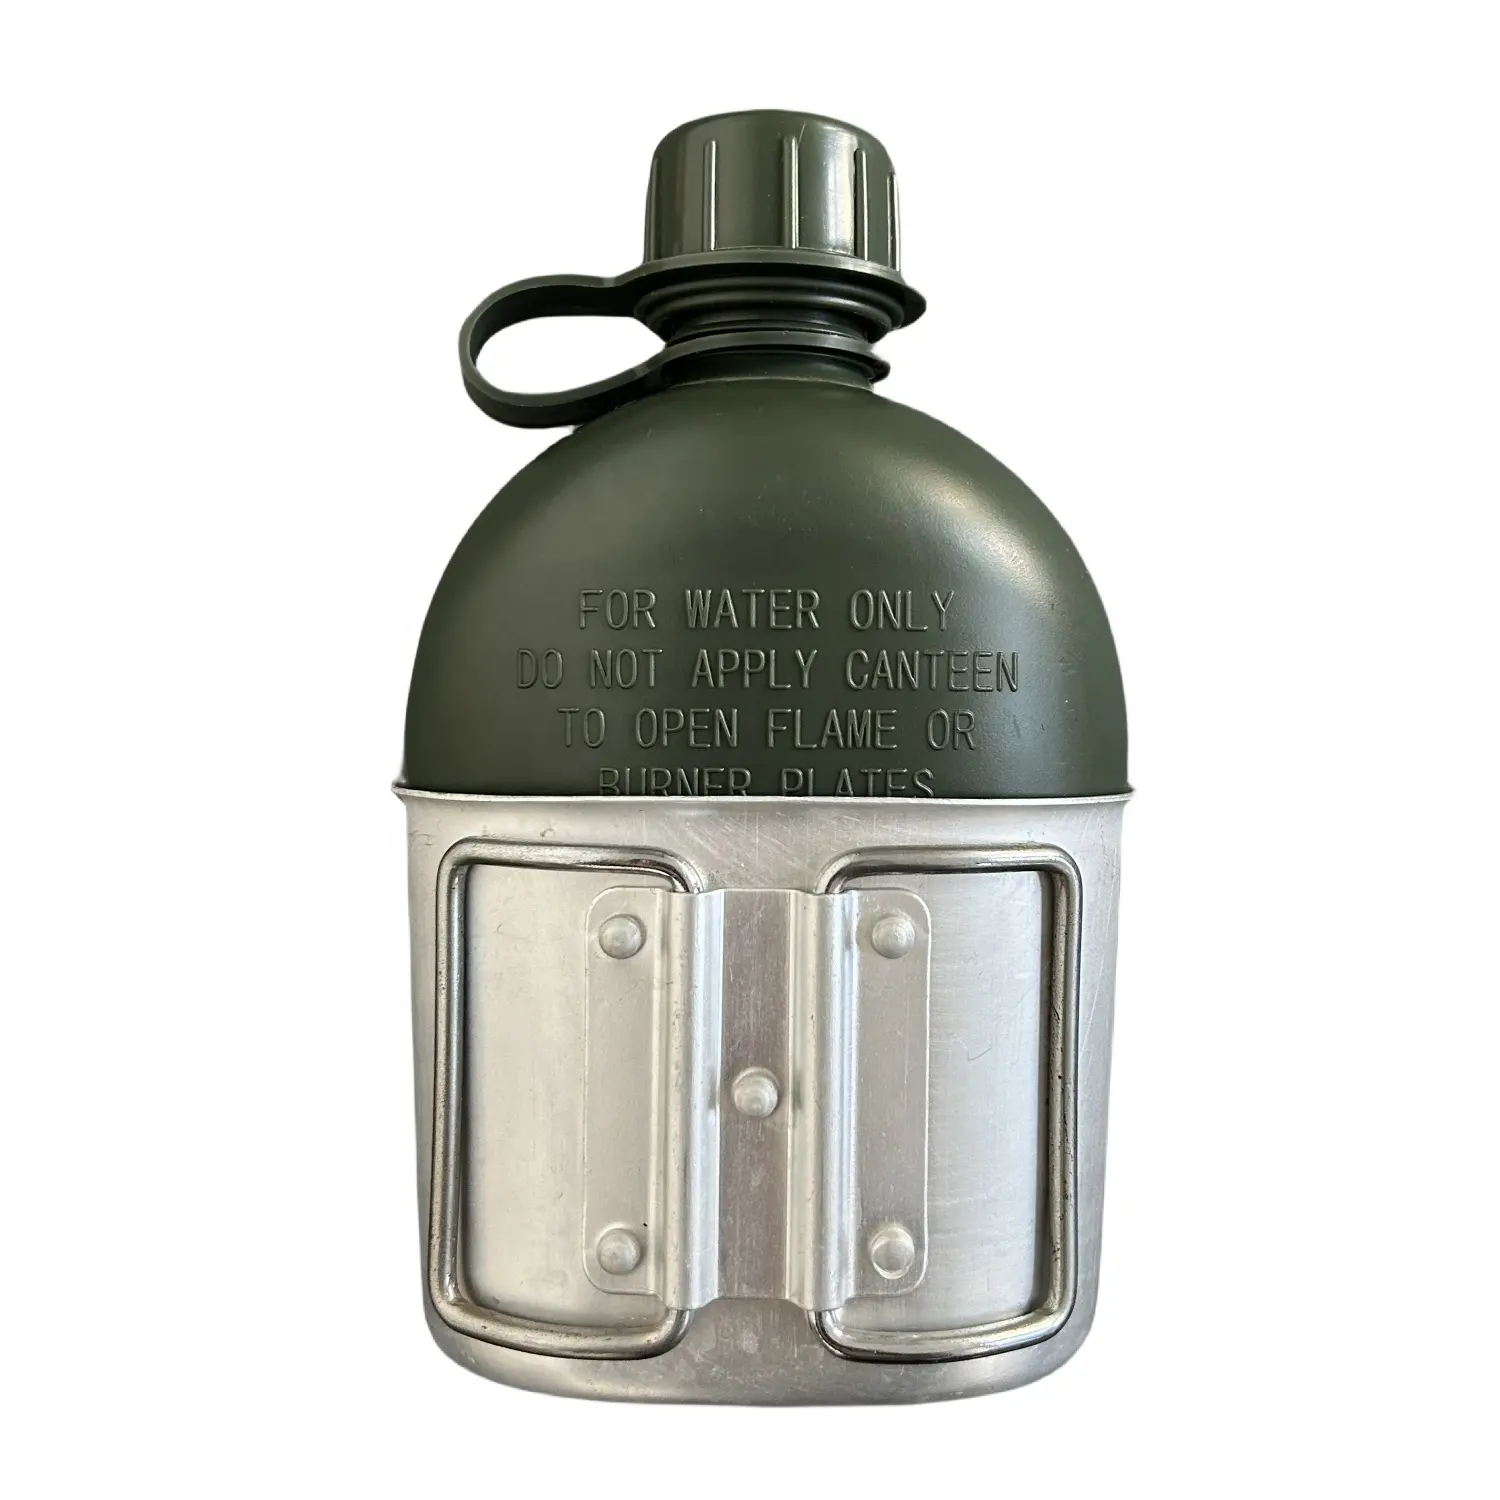 OEM USGI Style Canteens Kit with Aluminum Cup Foldable Handle for Hiking Backpacking Camping Army Green Water Bottle Canteen